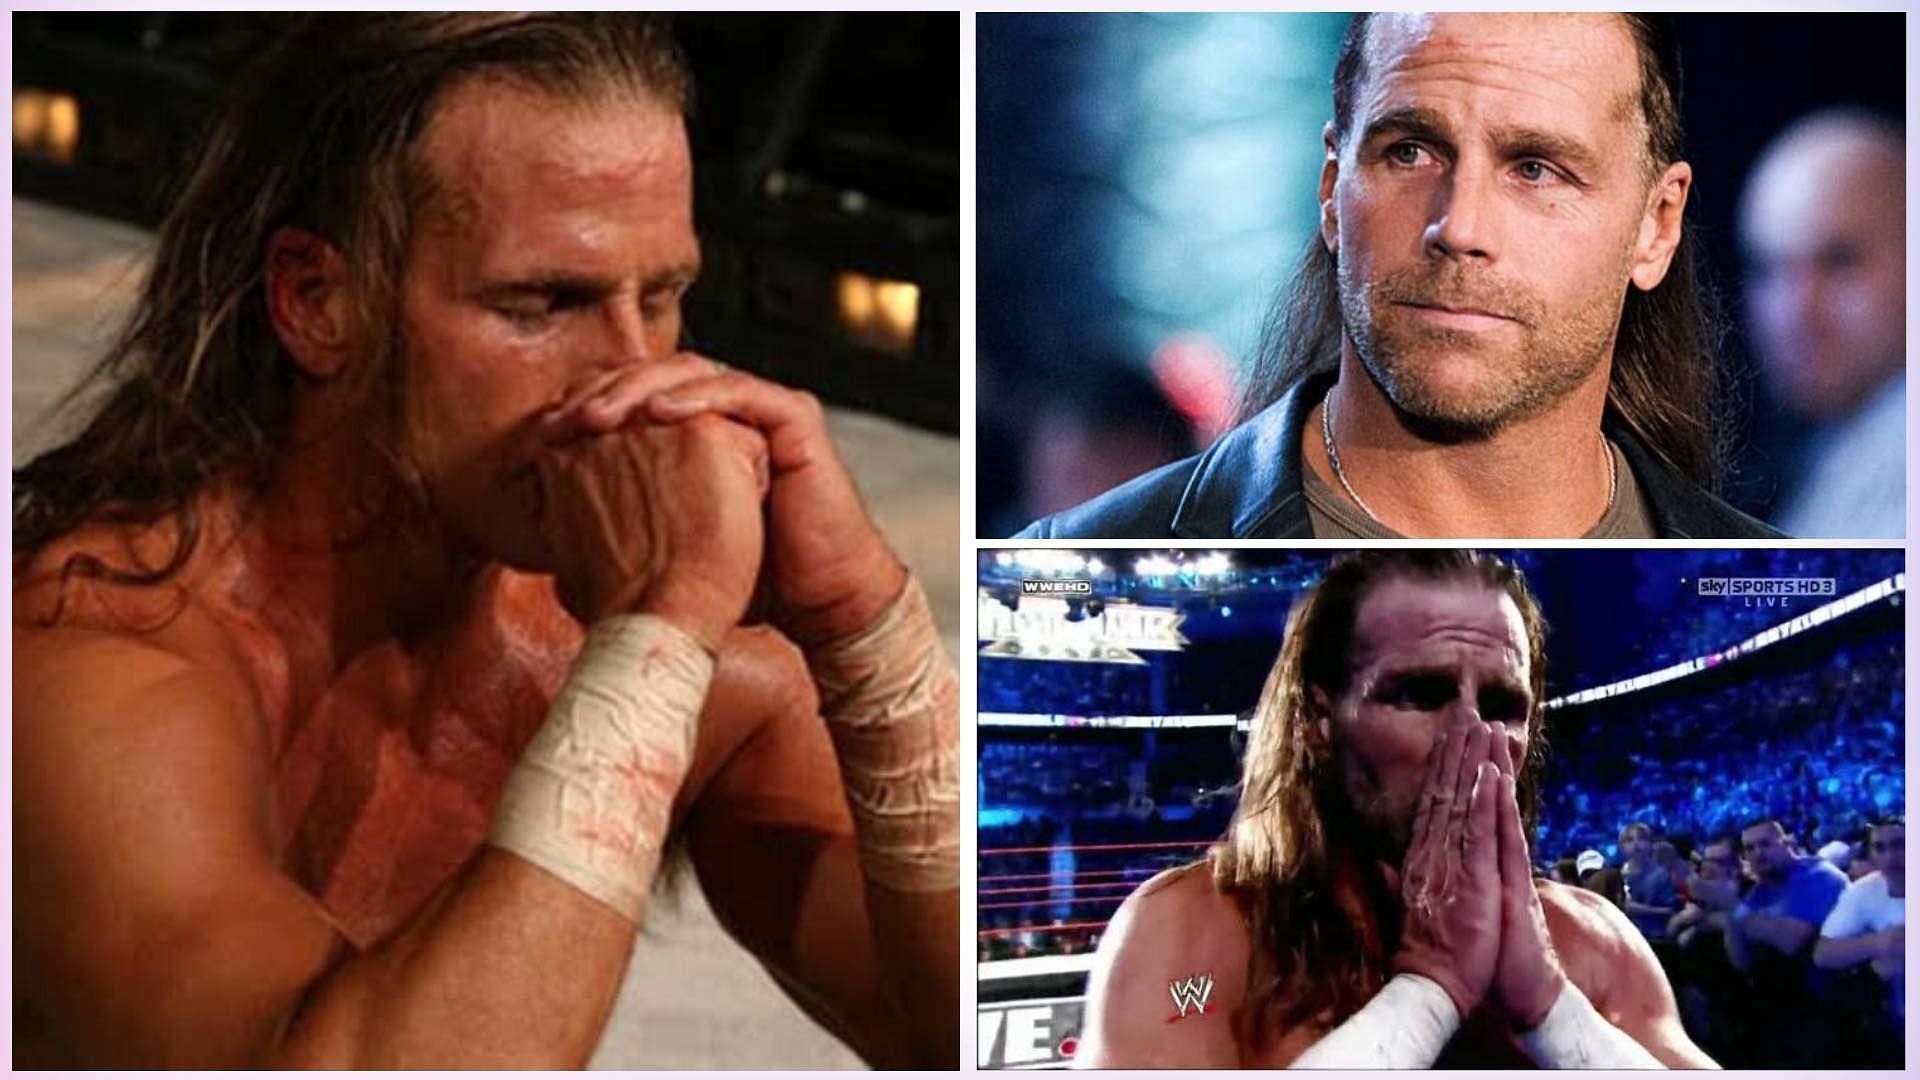 Shawn Michaels is a backstage producer for NXT.